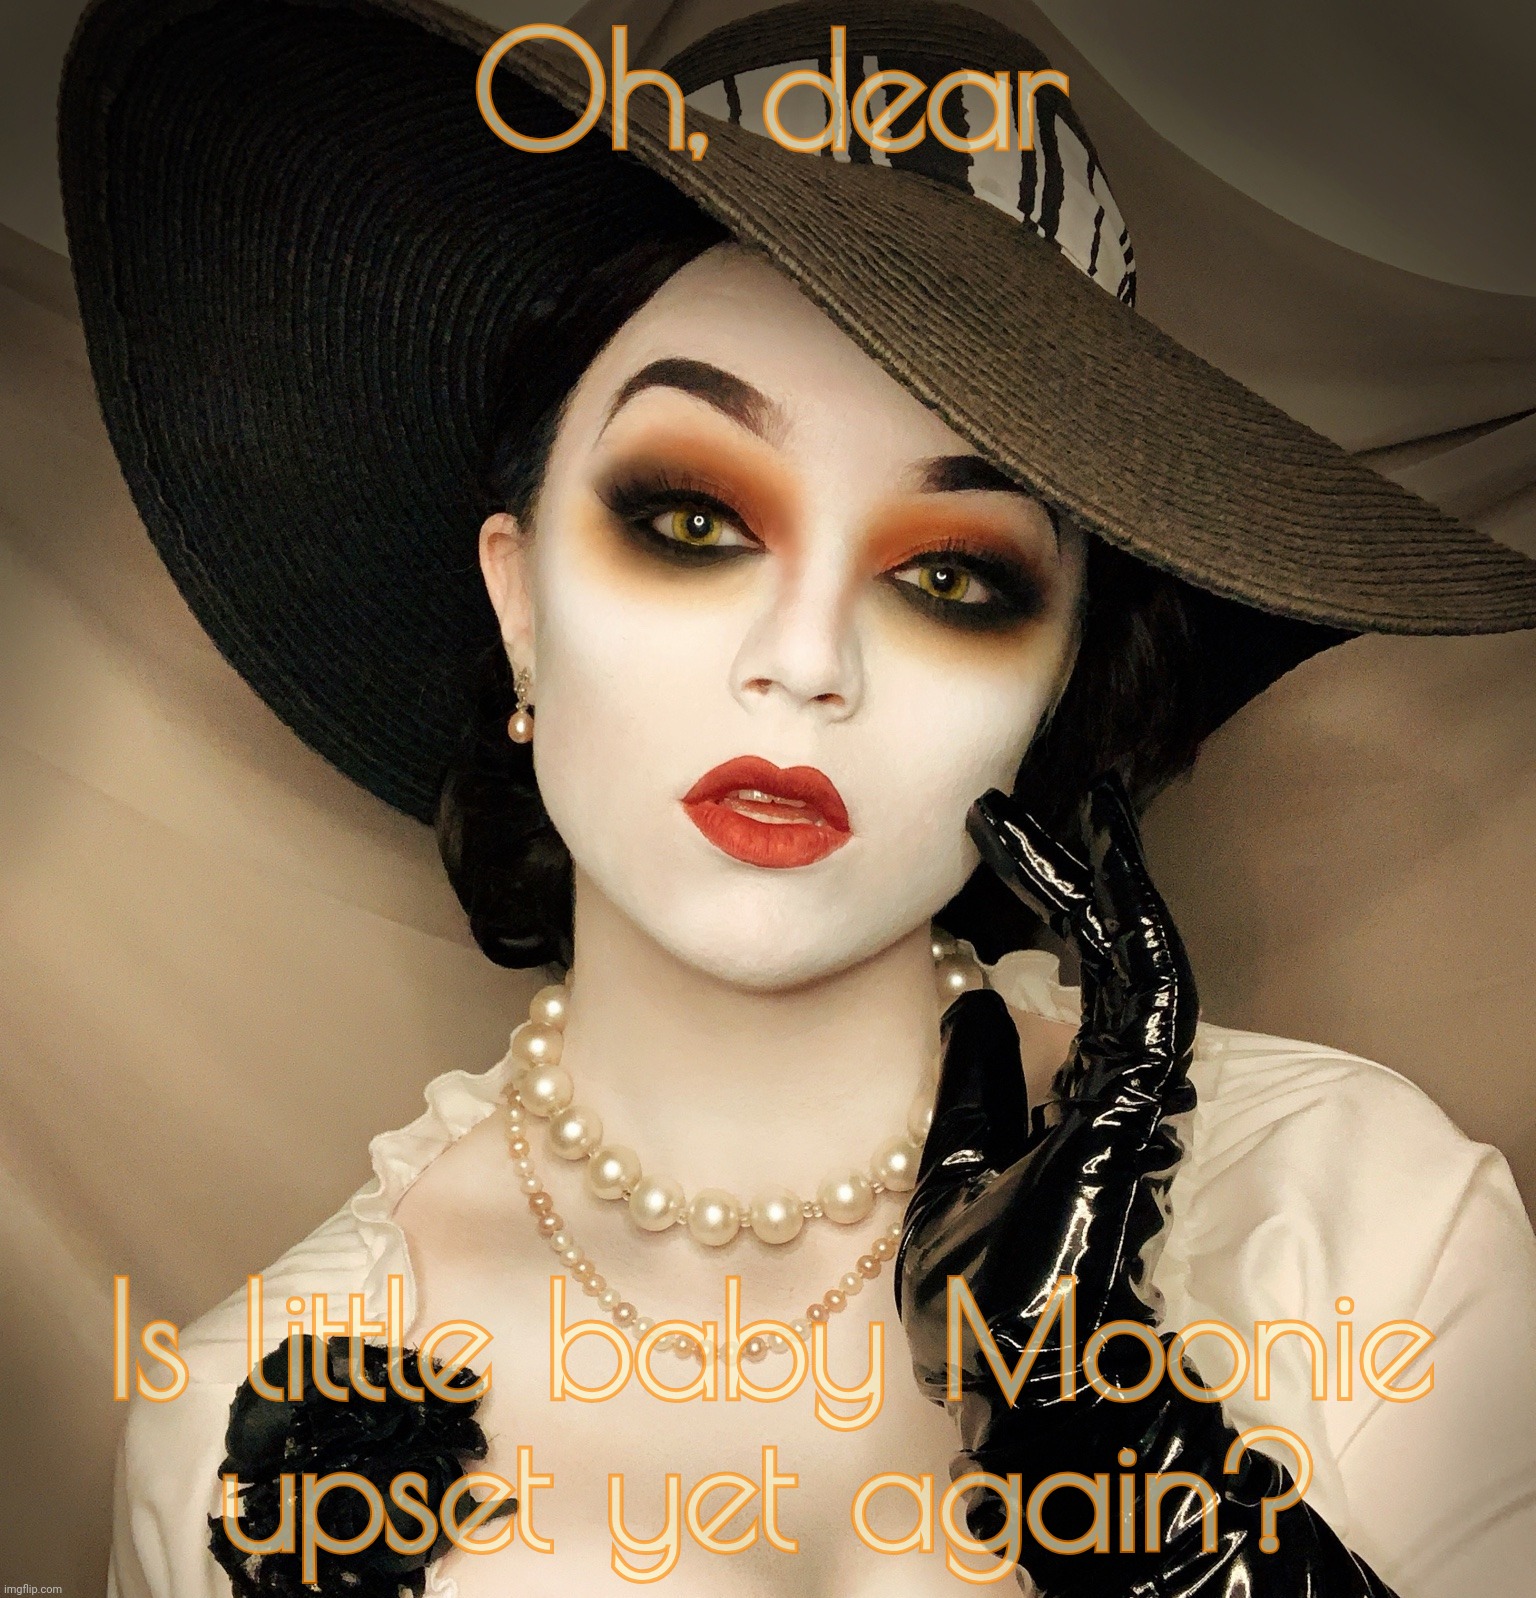 Lady Dimitrescu | Oh, dear Is little baby Moonie
upset yet again? | image tagged in lady dimitrescu | made w/ Imgflip meme maker